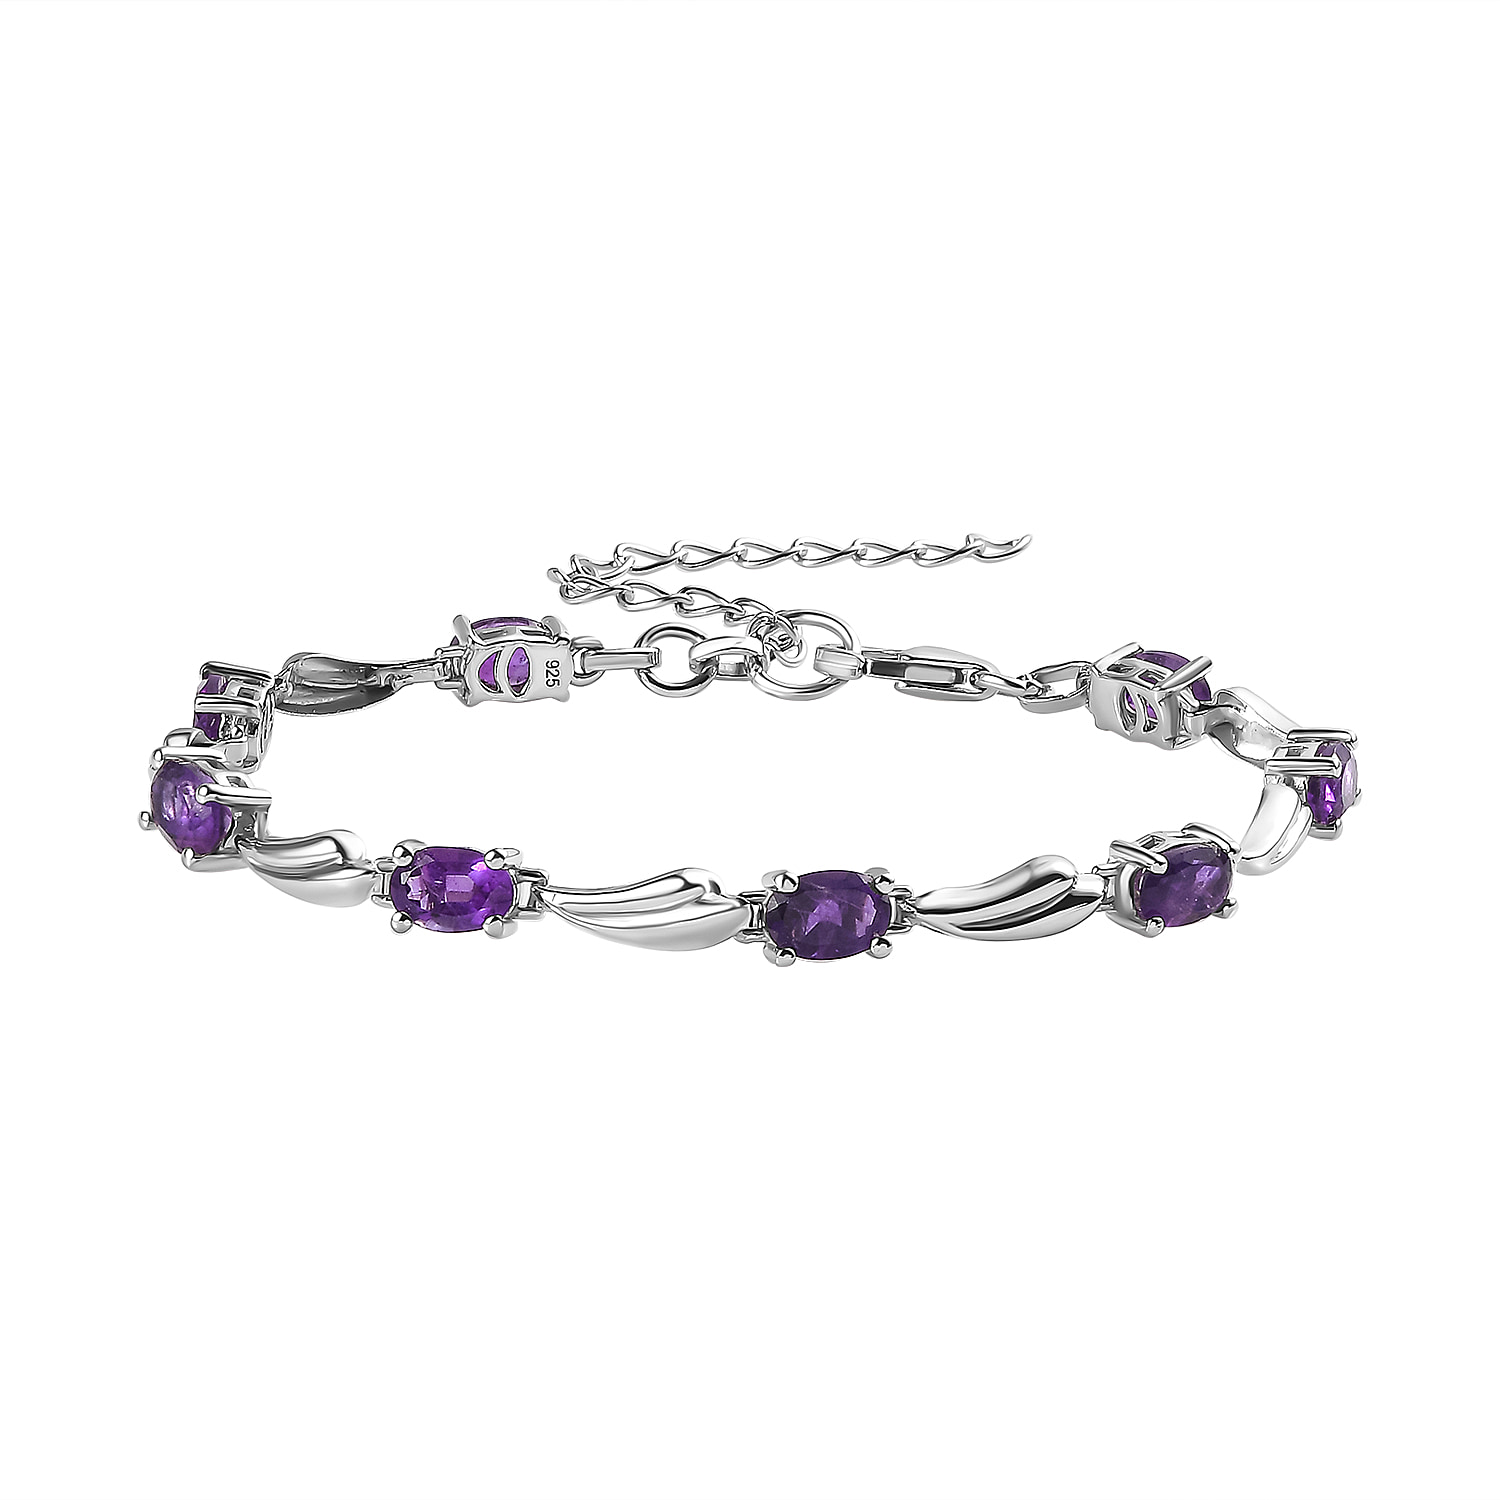 Amethyst Bracelet (6.5-2 inch Ext.) in Platinum Overlay Sterling Silver 3.65 Ct.